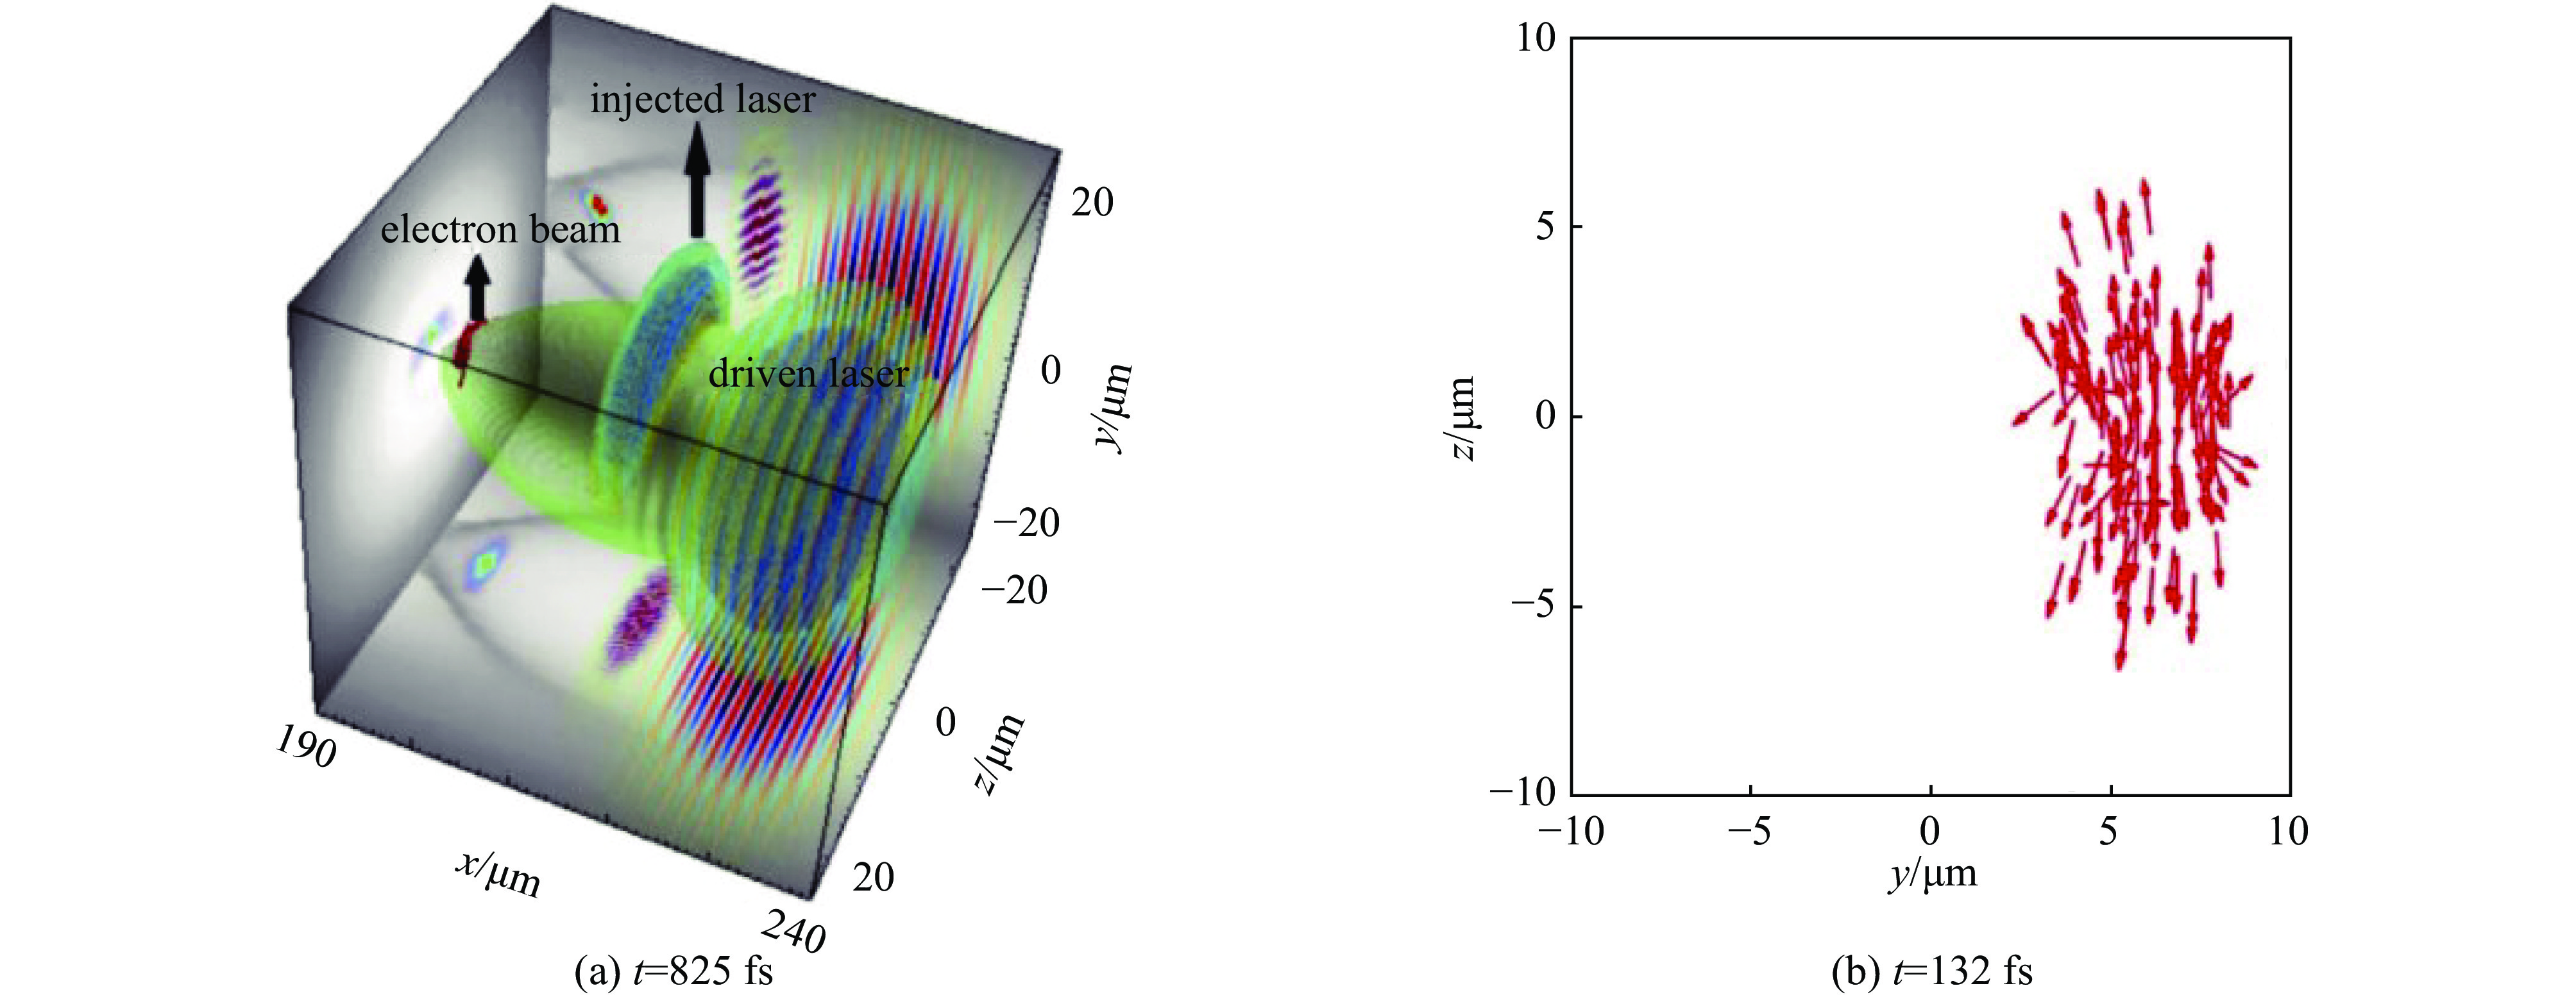 (a) Spatial distributions of the plasma wake (green iso-surfaces), the injected electron beam (red points), the electric fields of the drive and injection lasers (blue-red-orange-green iso-surfaces) at t = 825 fs. (b) Momentum distribution of the accelerated electrons at the ionization time of t = 132 fs[37]